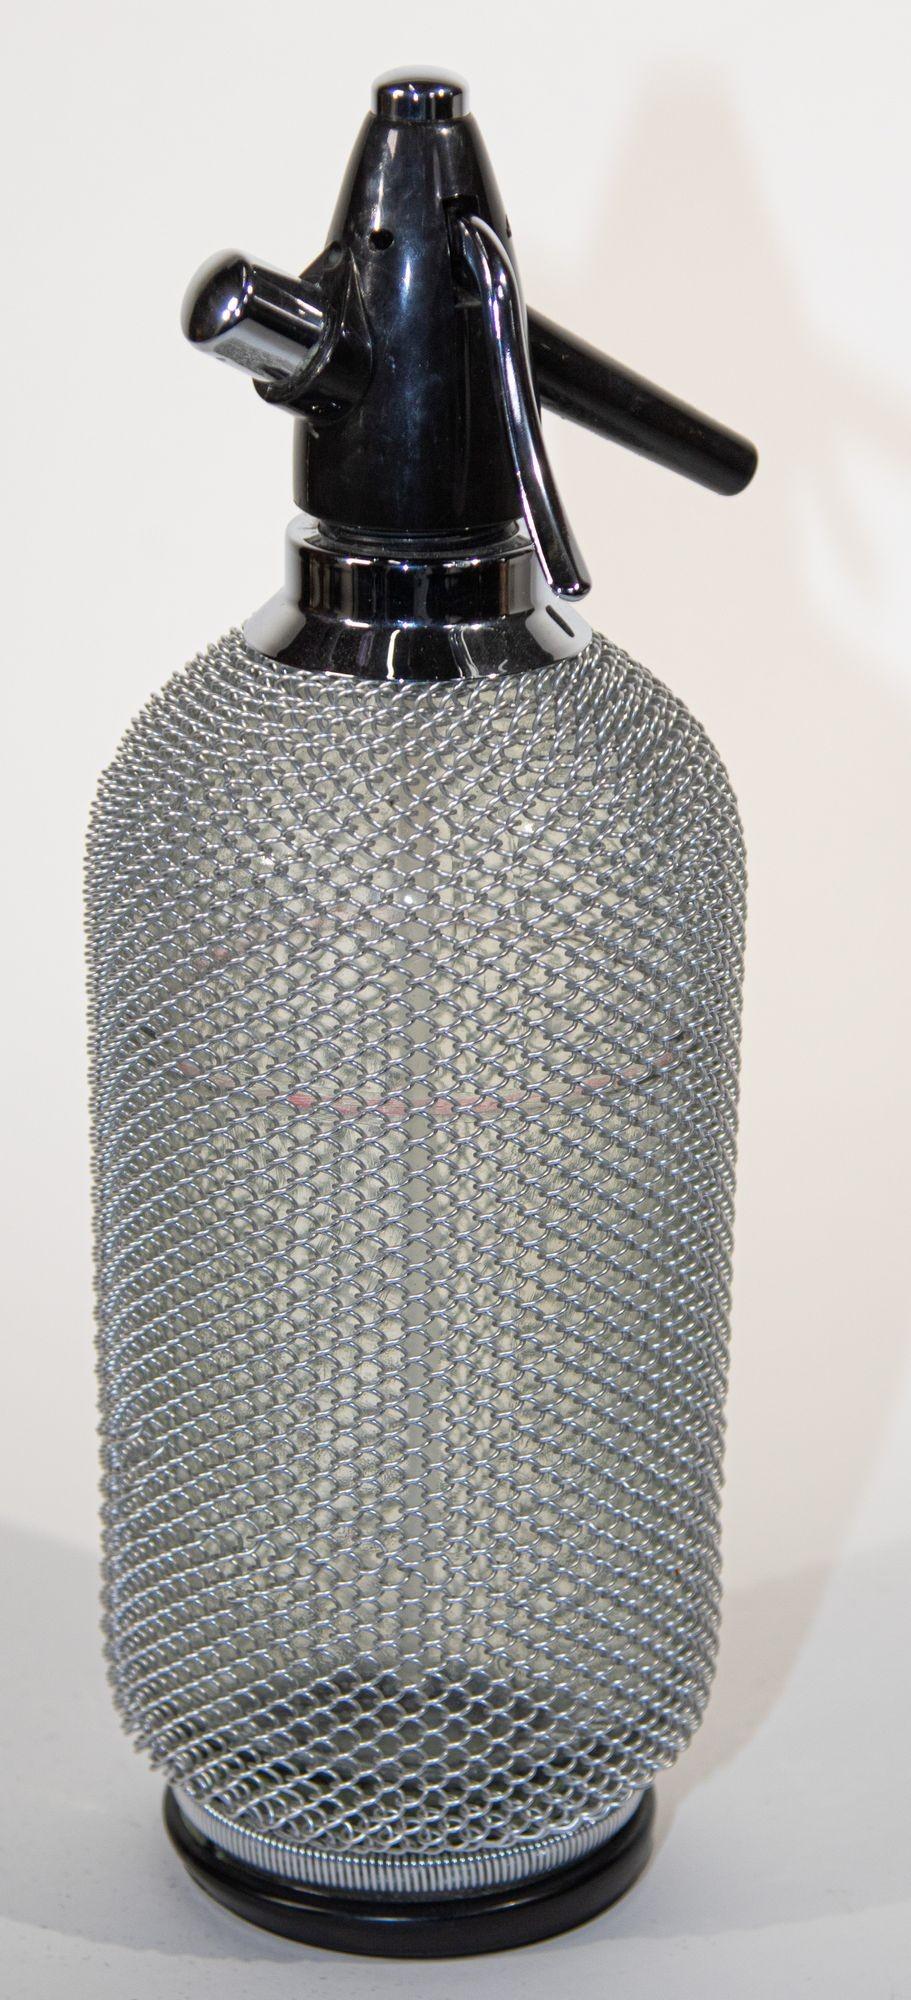 Vintage Classic Soda Siphon Seltzer Glass Bottle with Wire Mesh.
This is a fantastic vintage seltzer bottle with a metal wire mesh casing around the glass.
Vintage seltzer bottle made in Germany.
Enjoy the fresh and healthy fizz of sparkling water,